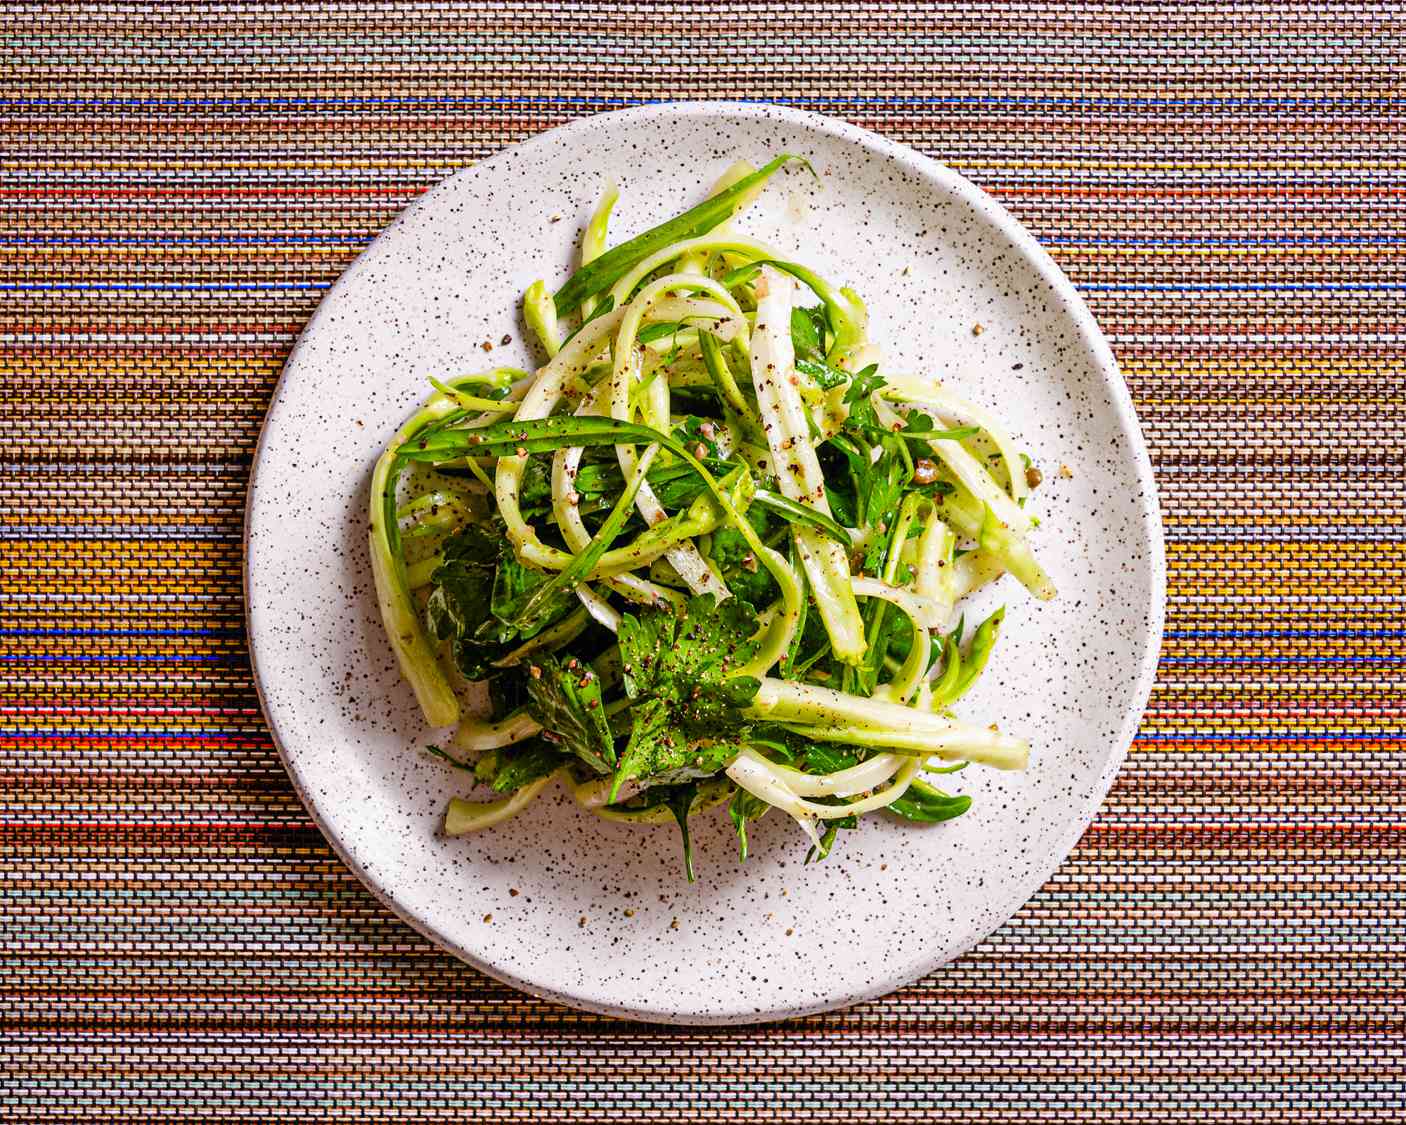 Overhead view of puntarelle salad on a colorful stripped background